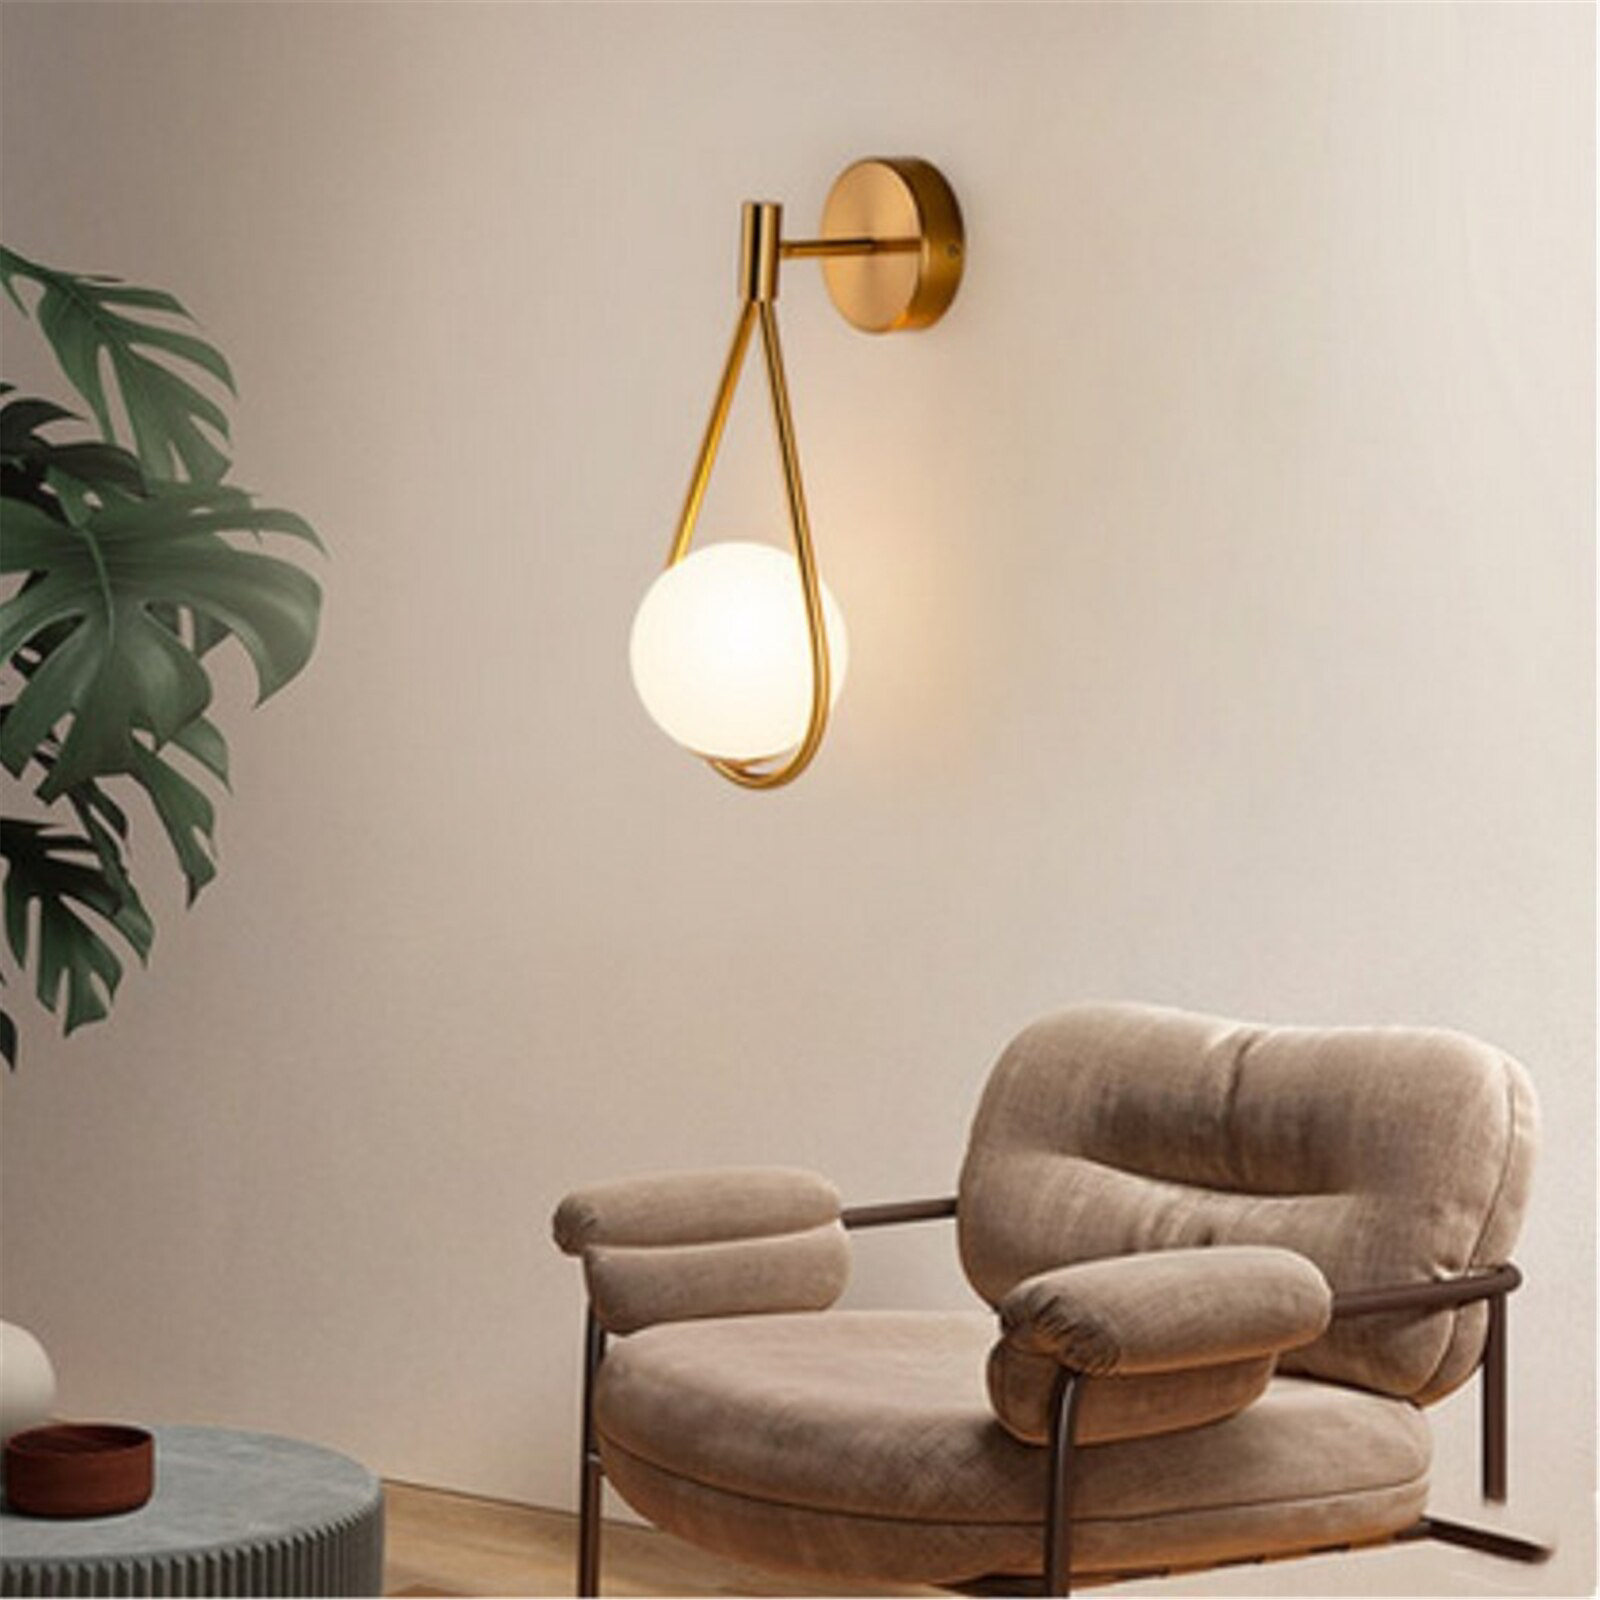 Small yet striking: The beauty of the Mini Wall Lamp